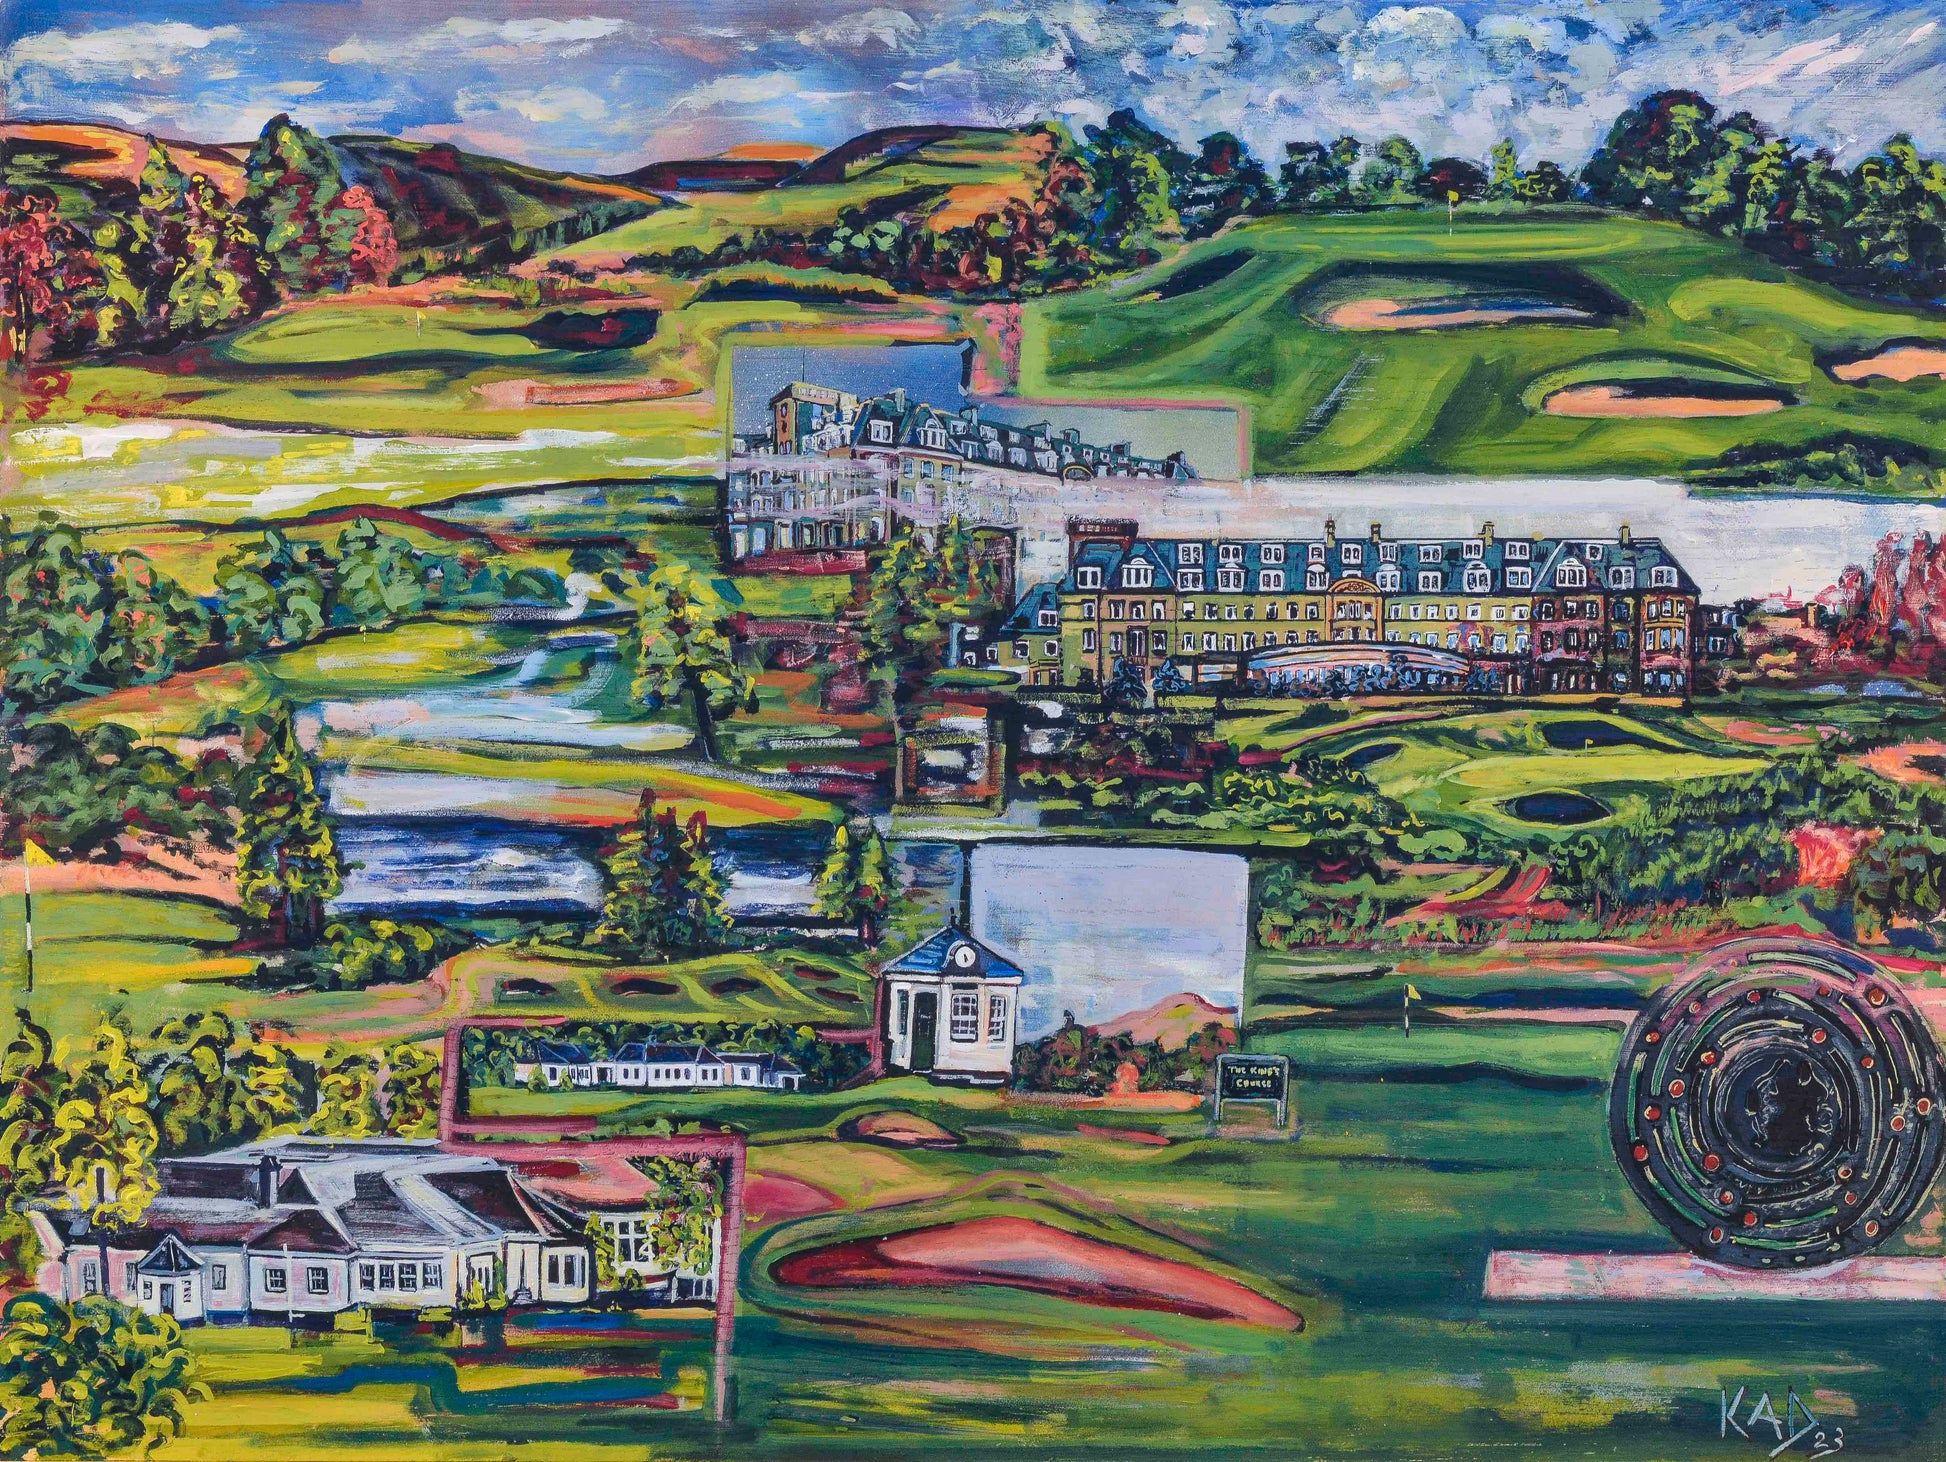 Gleneagles hotel and the Kings course painting